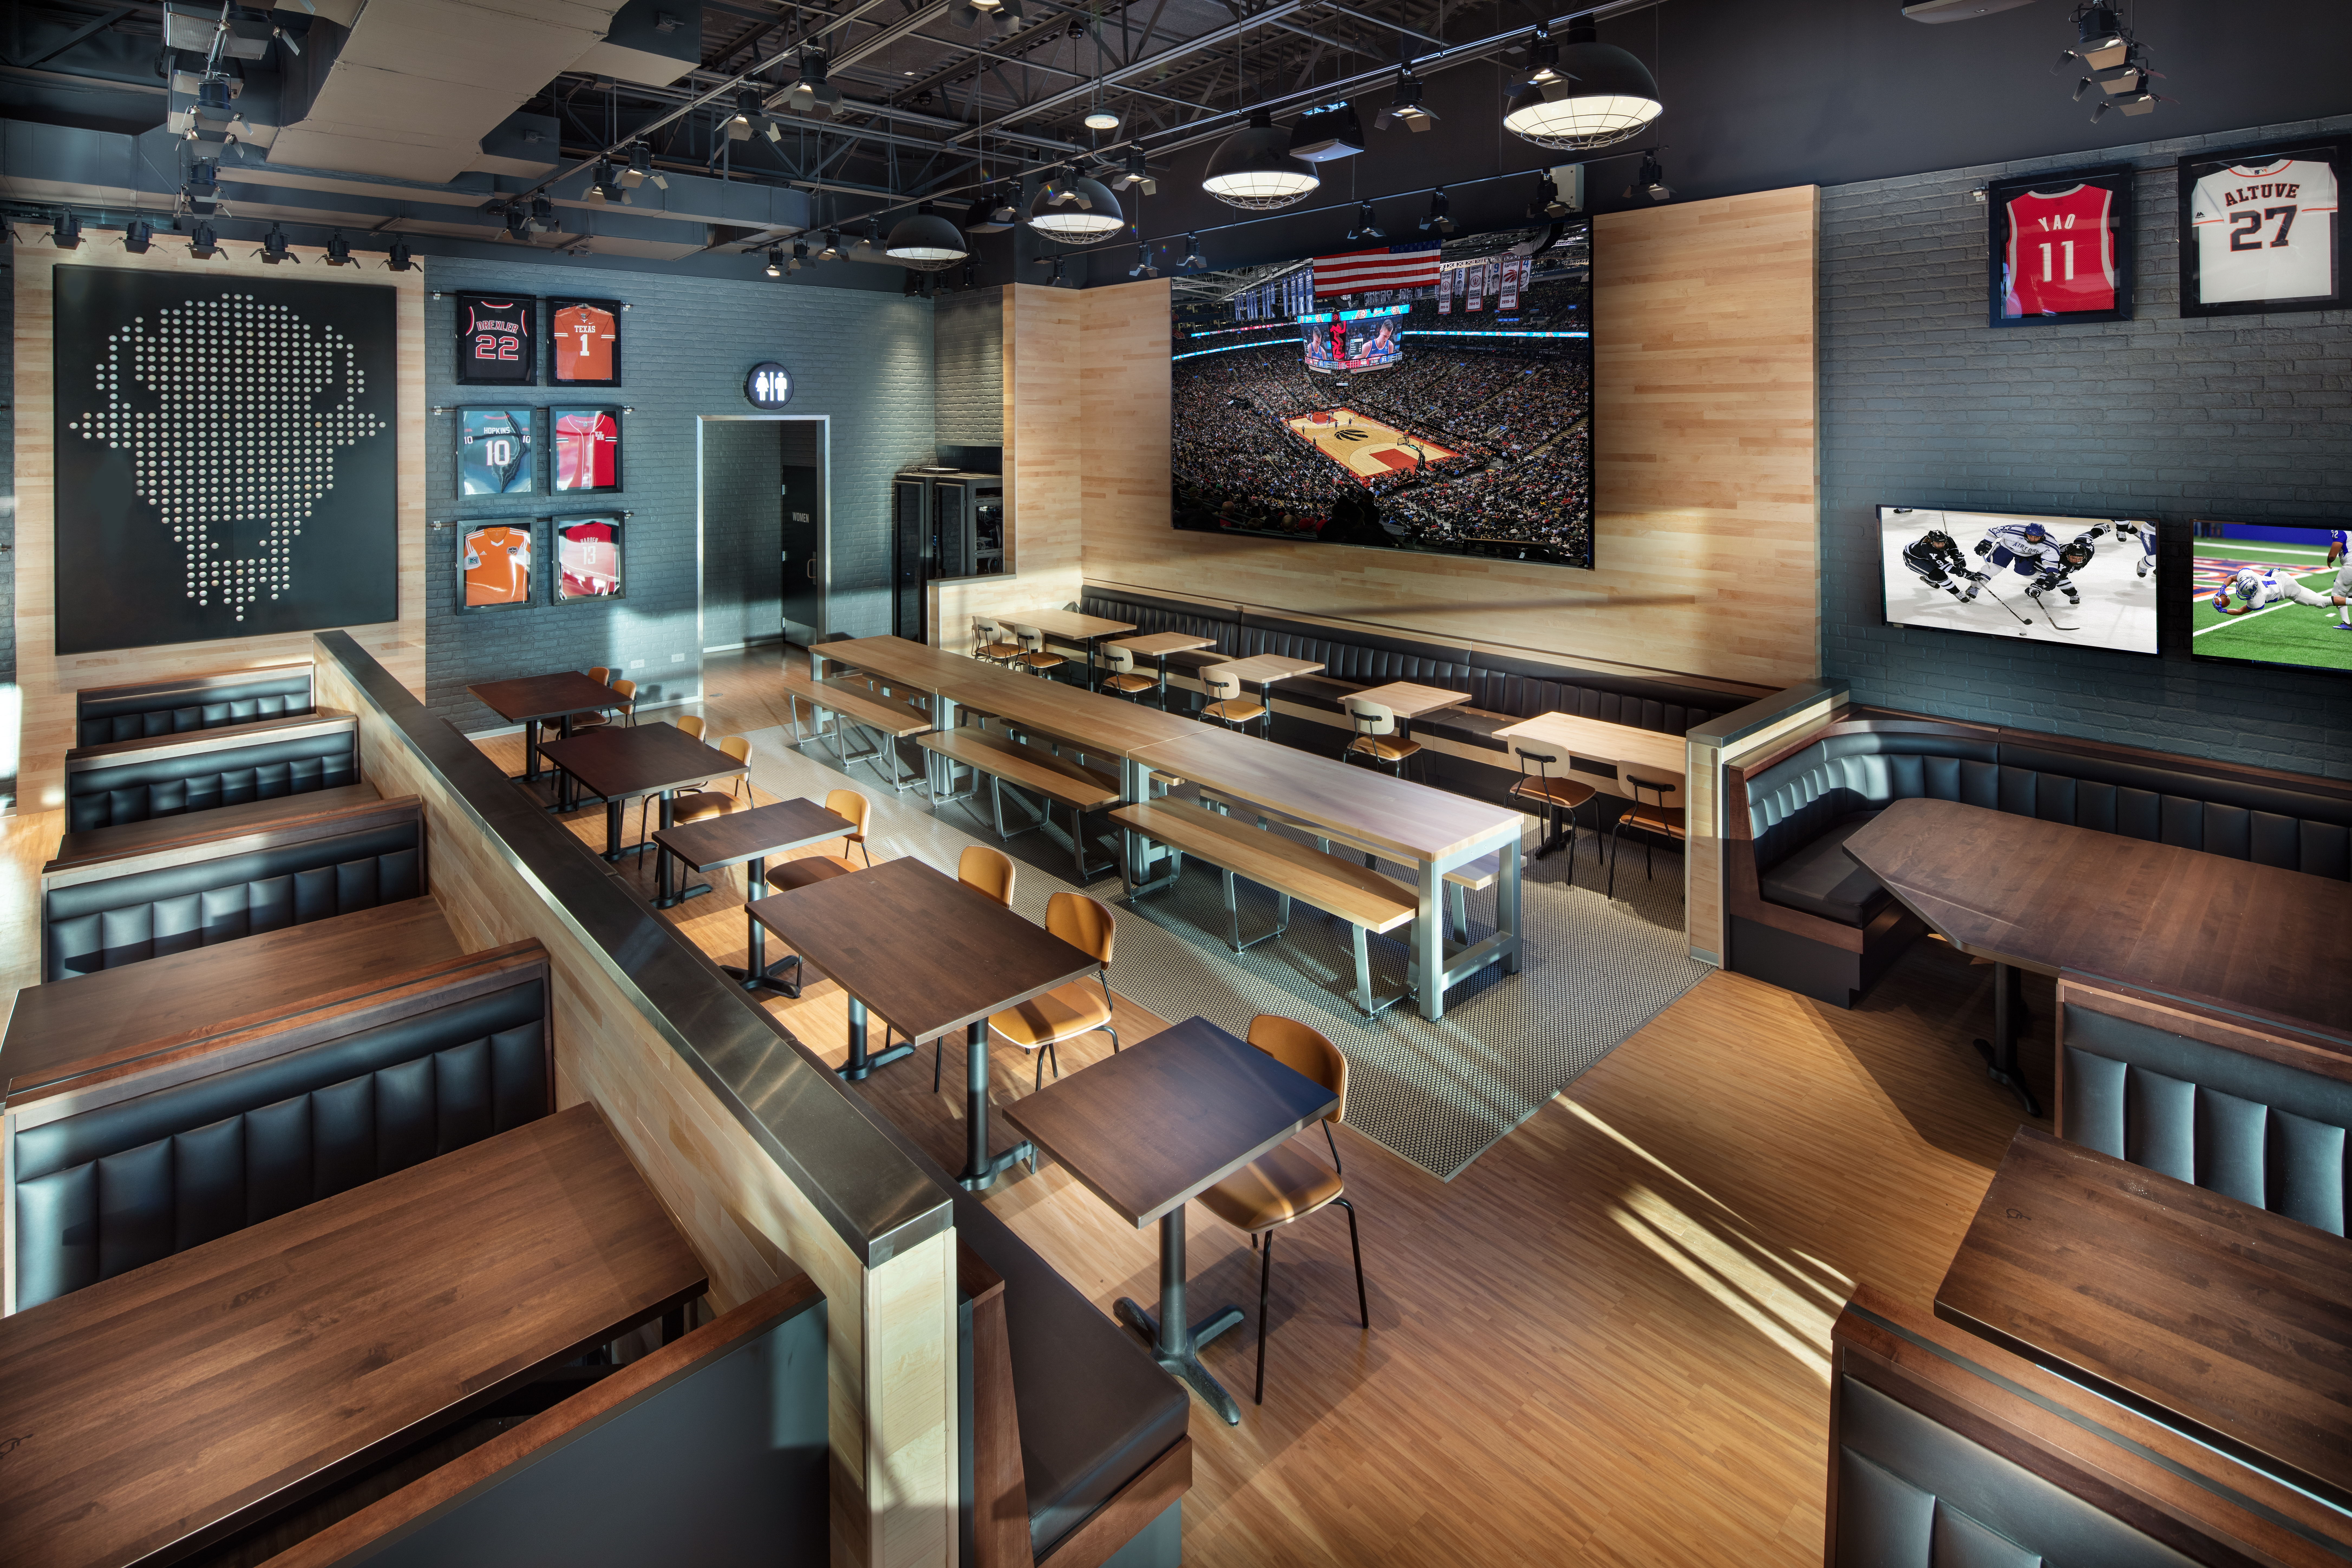 korrelat Tage af coping Buffalo Wild Wings Press Center – Buffalo Wild Wings® is the ultimate place  to get together with your friends, watch sports, drink beer, and eat wings.  Order online today.